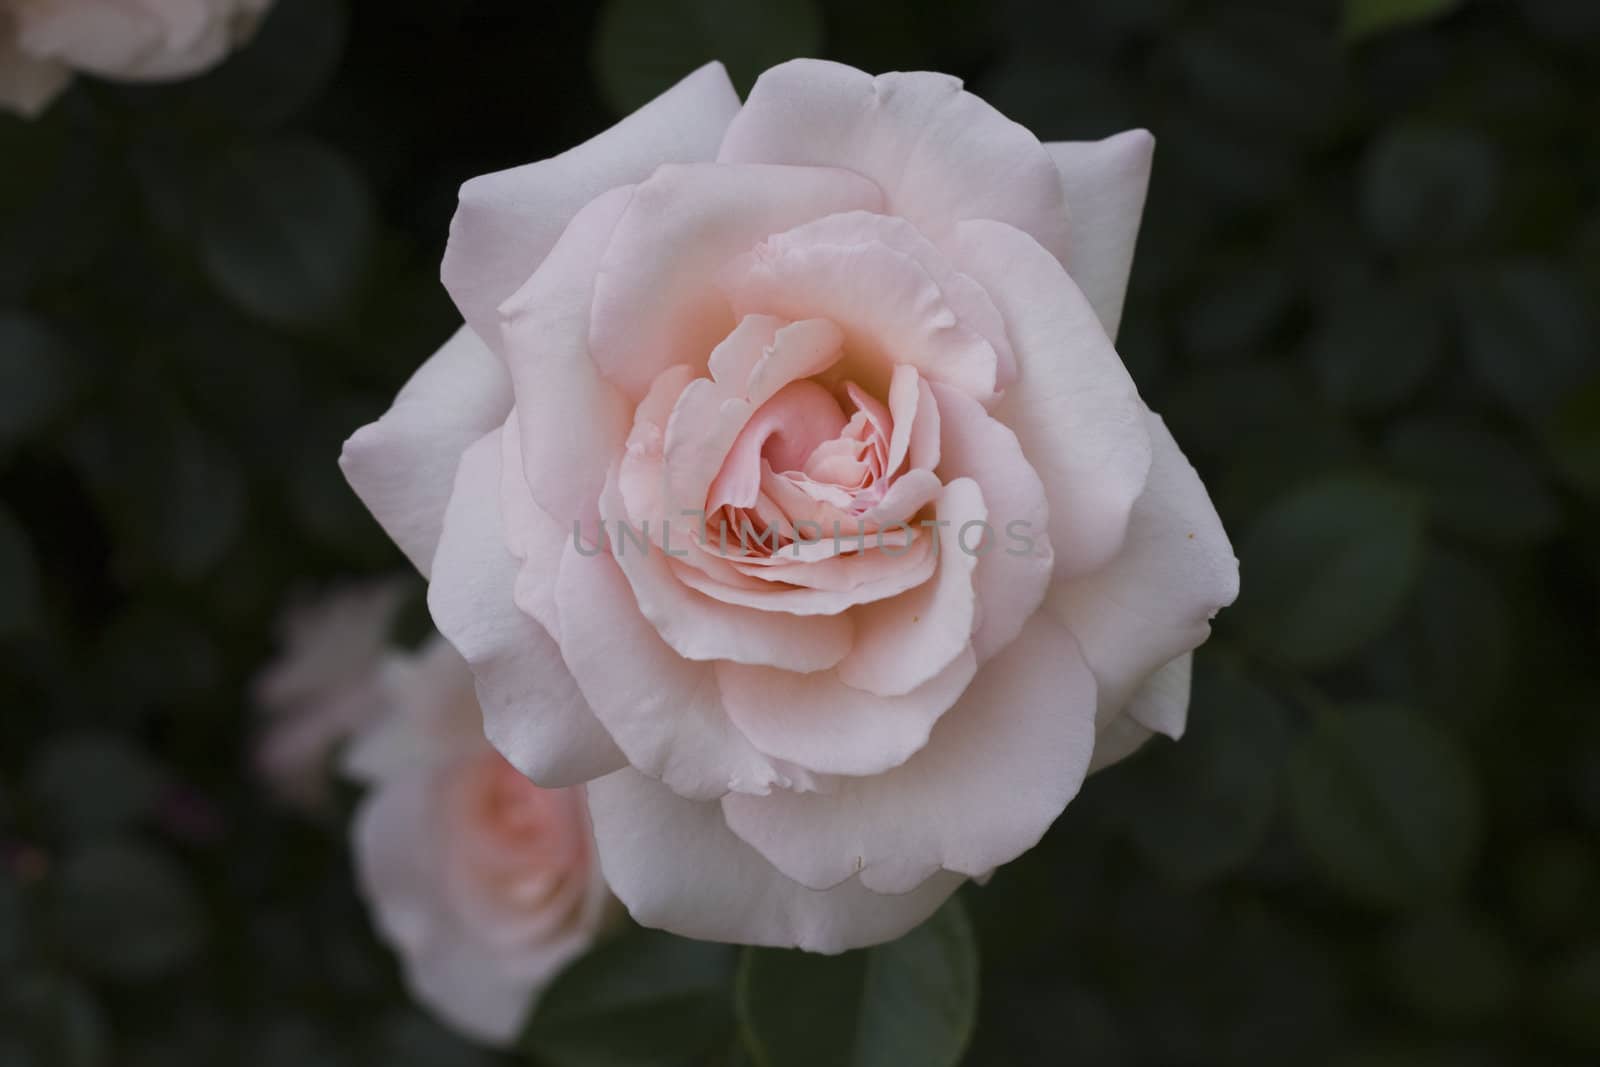 close-up of a beautiful pink rose in a park